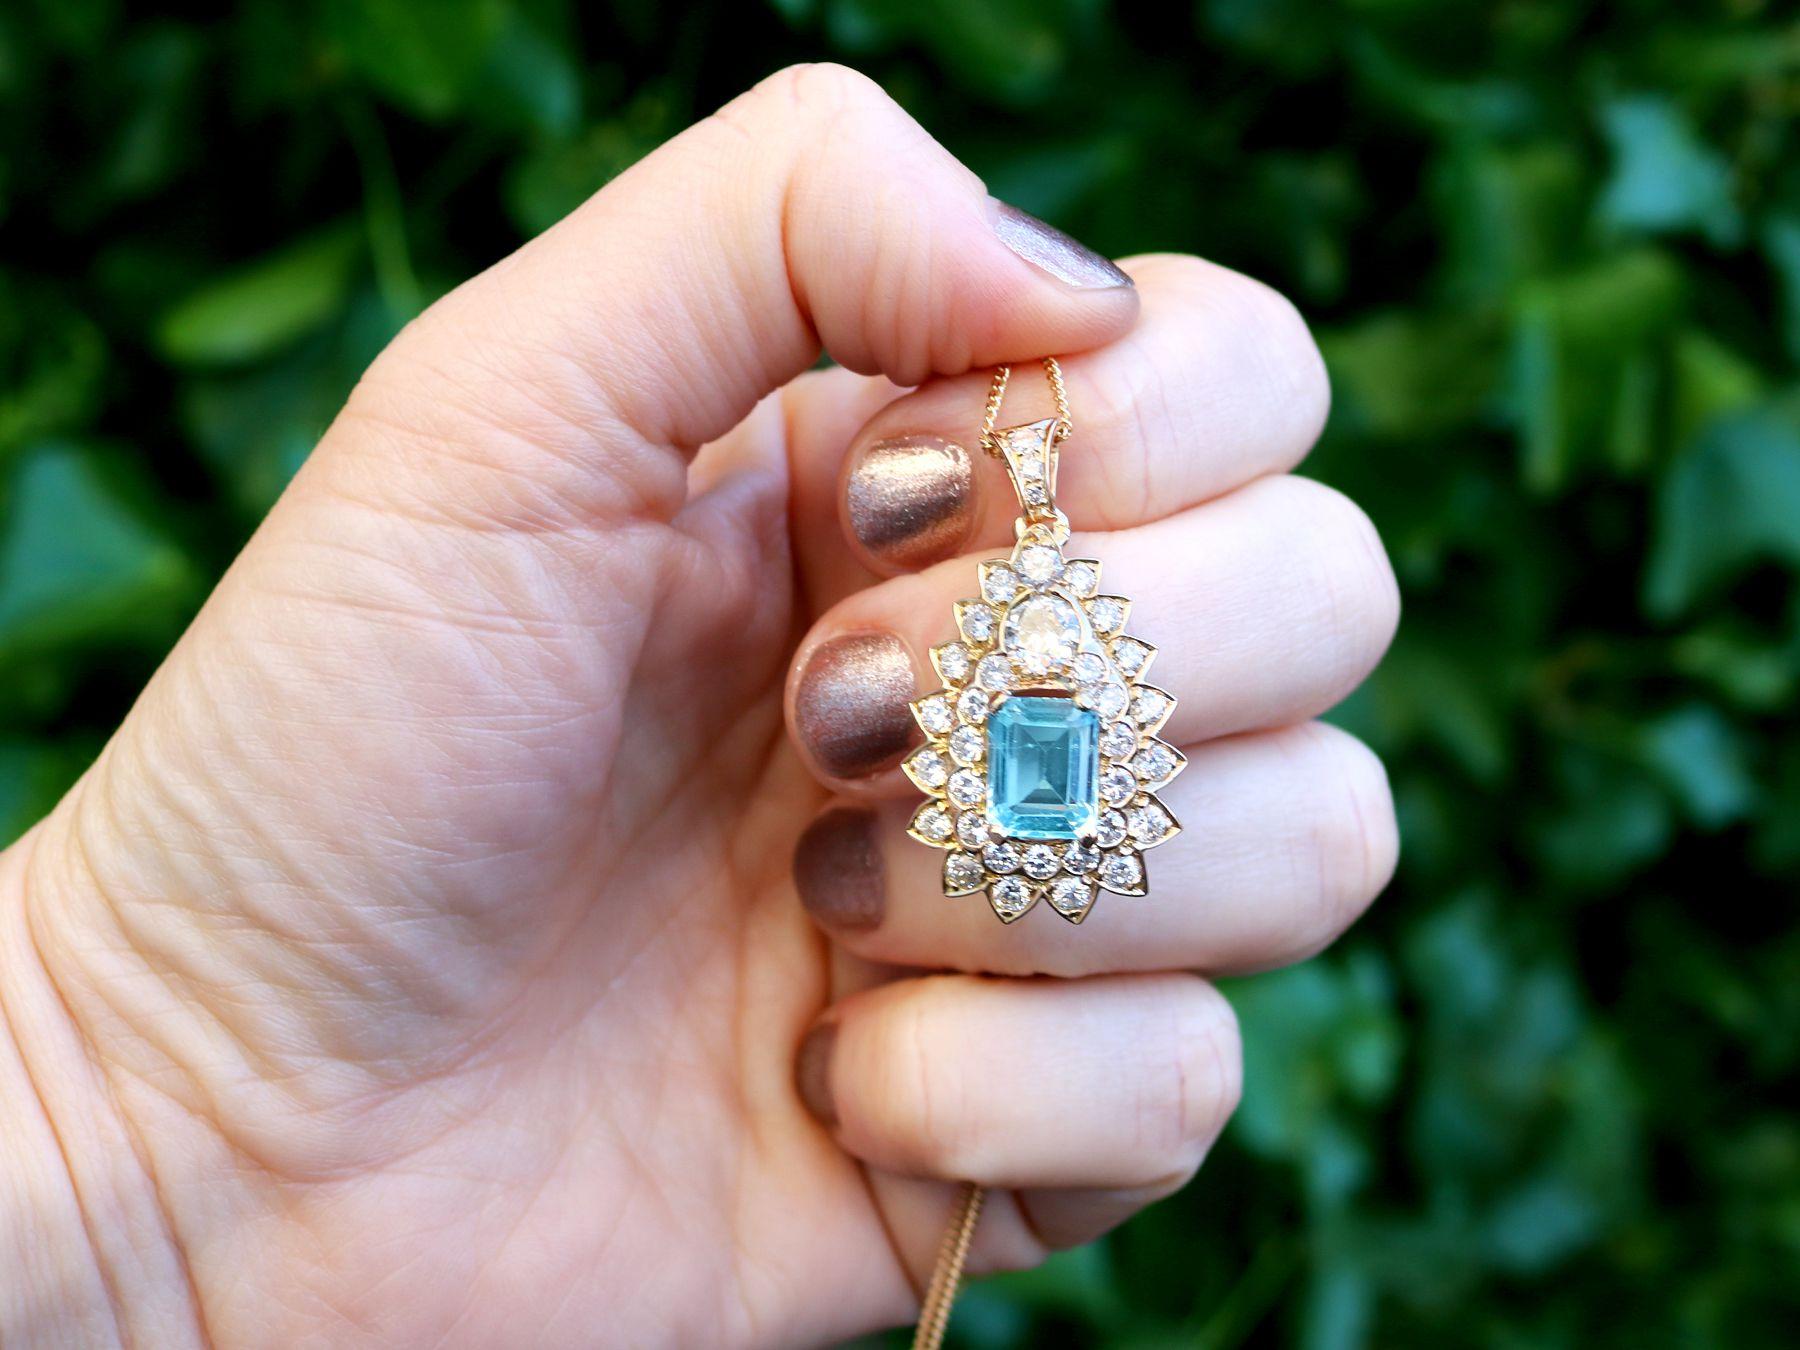 A stunning vintage French 3.95 carat topaz and 3.08 carat diamond, 18 karat yellow gold pendant and chain; part of our diverse vintage jewelry and estate jewelry collections.

This stunning, fine and impressive vintage topaz and diamond pendant has